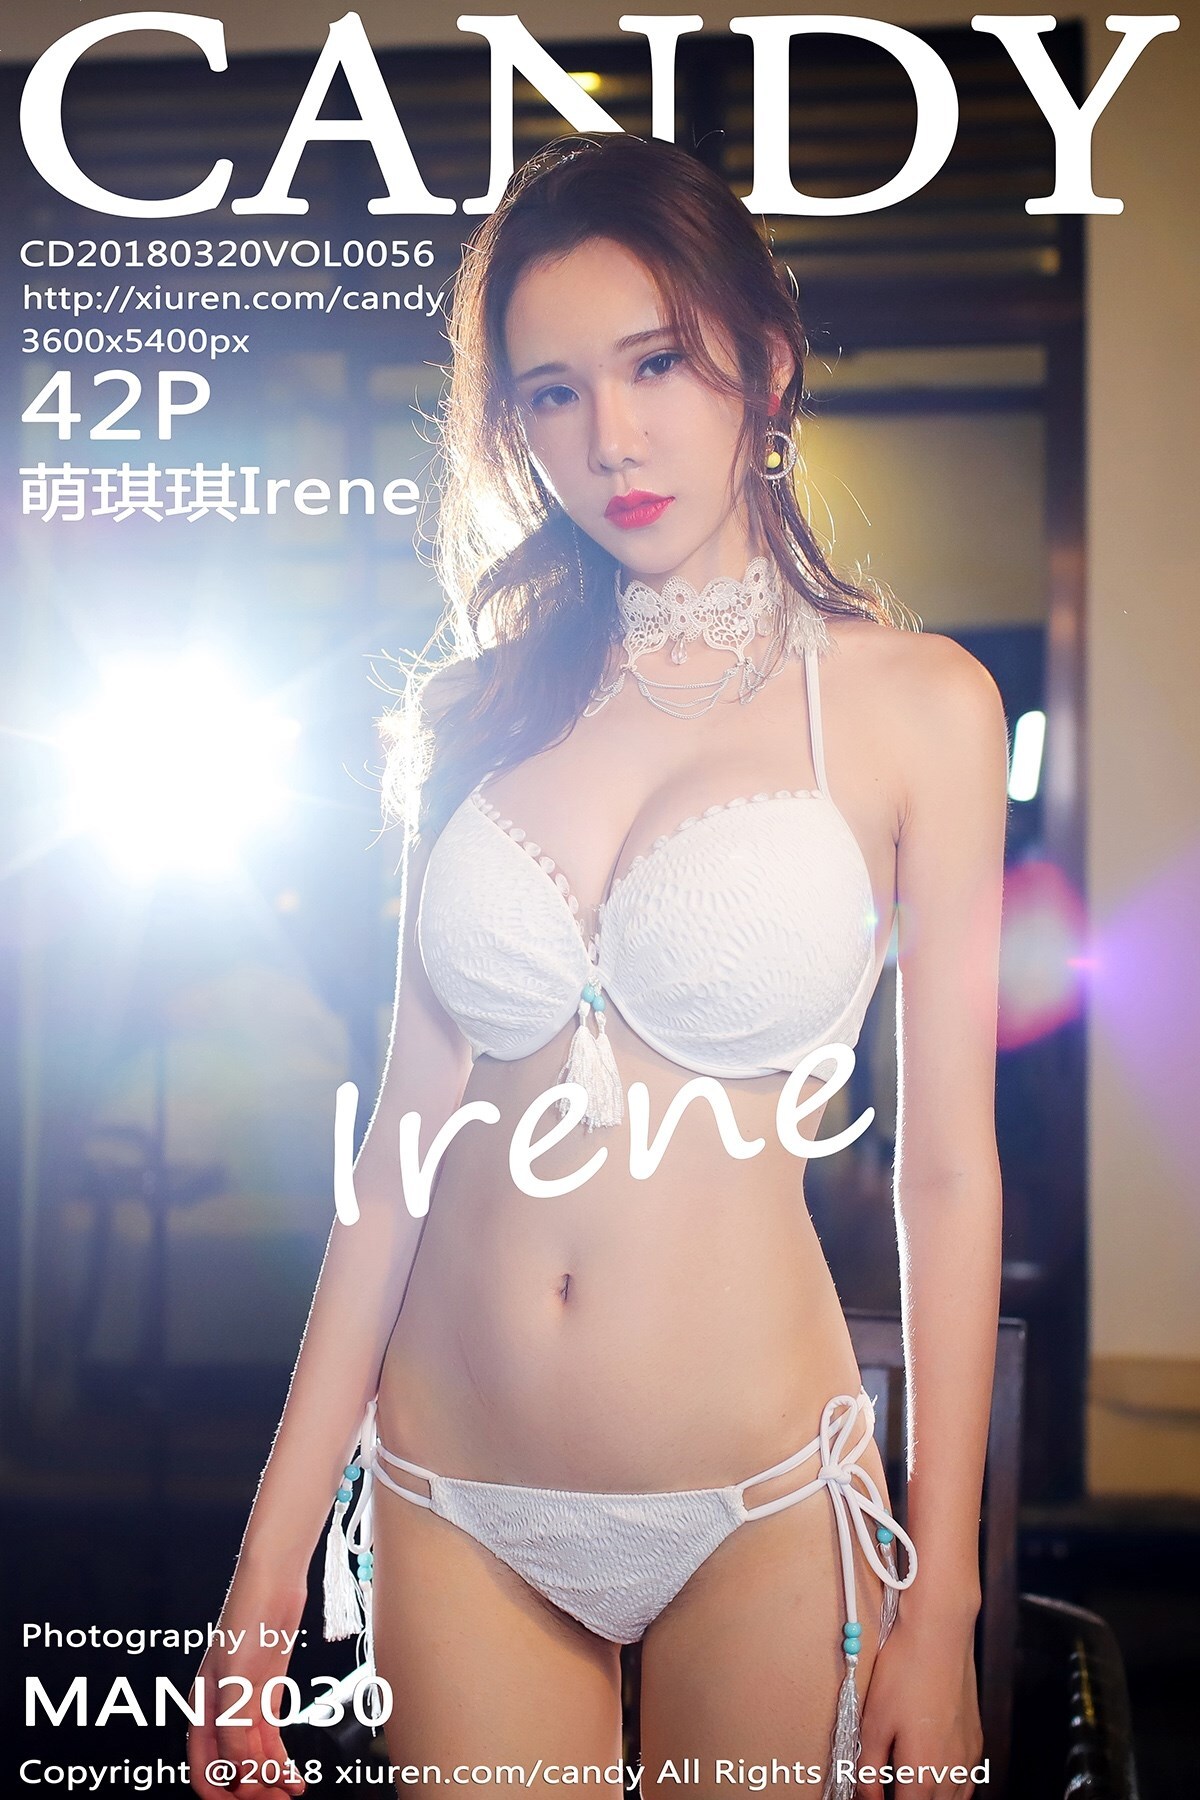 [candy pictorial] March 20, 2018 Vol.056 Mengqiqi Irene